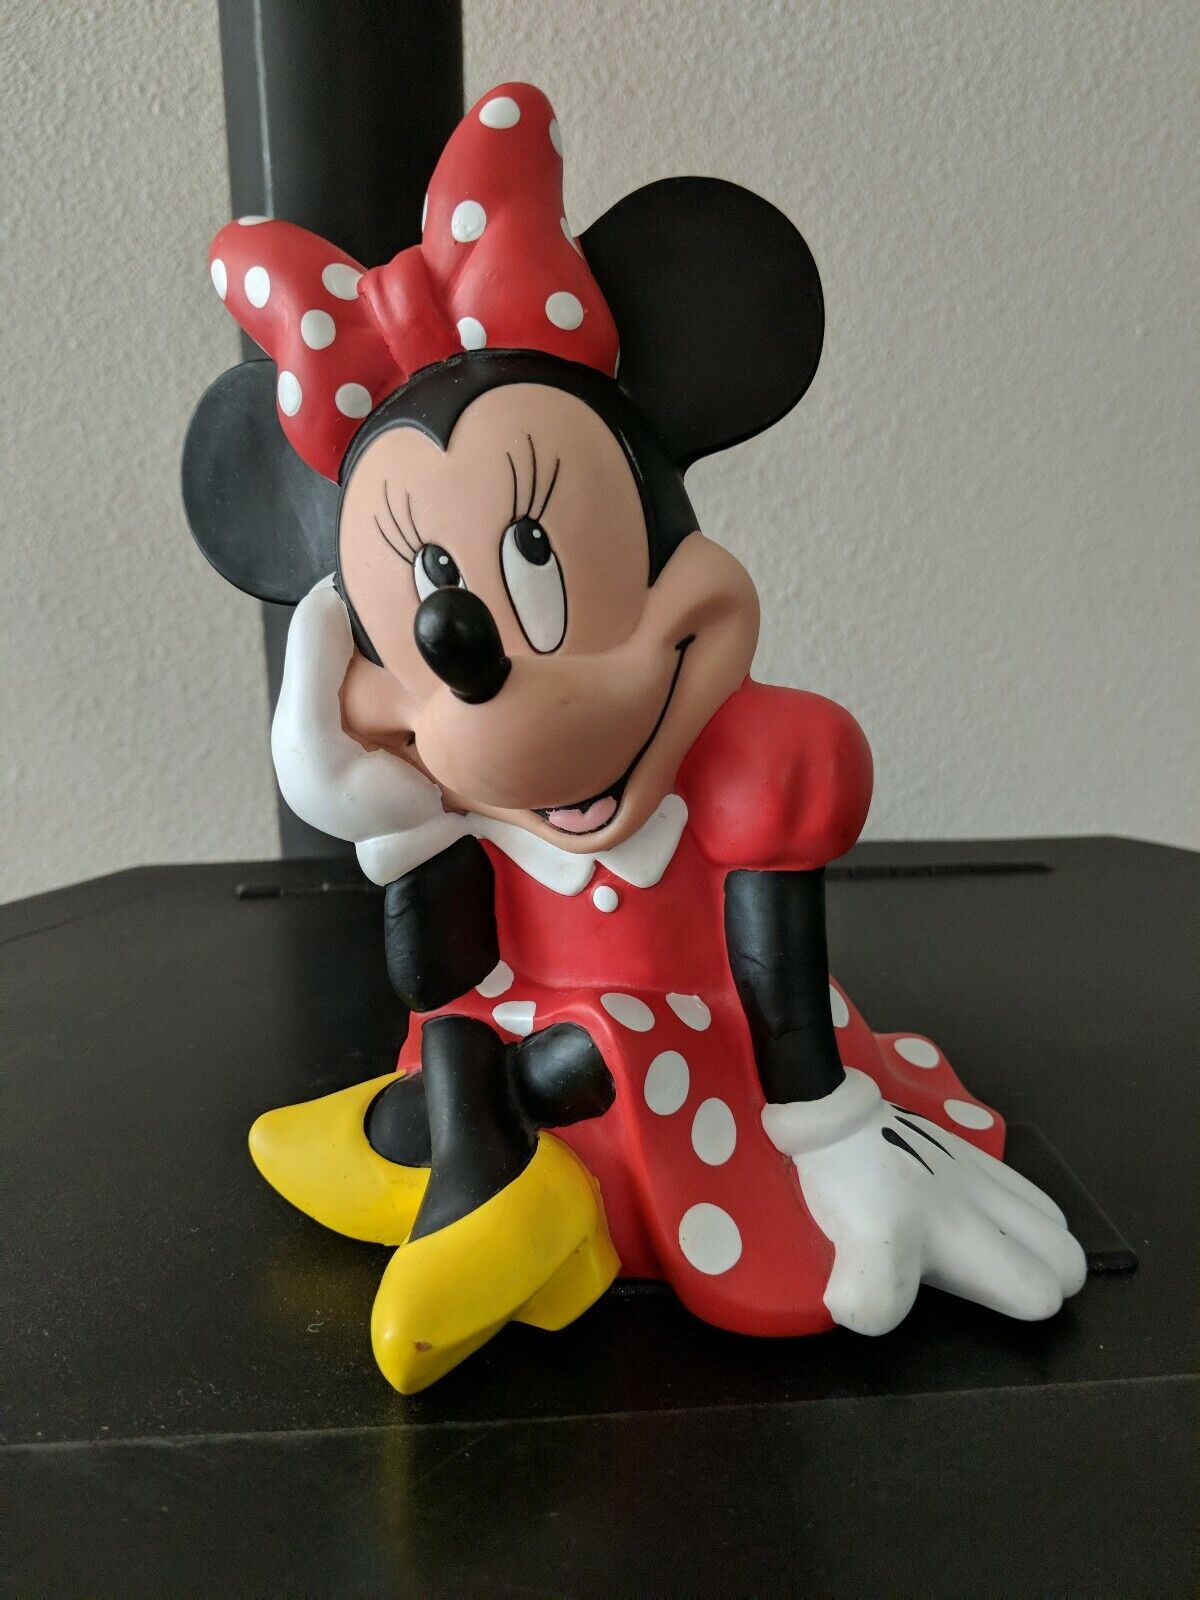 Disney Minnie Mouse Coin Piggy Bank White Polka Dots Red Dress Hard Plastic